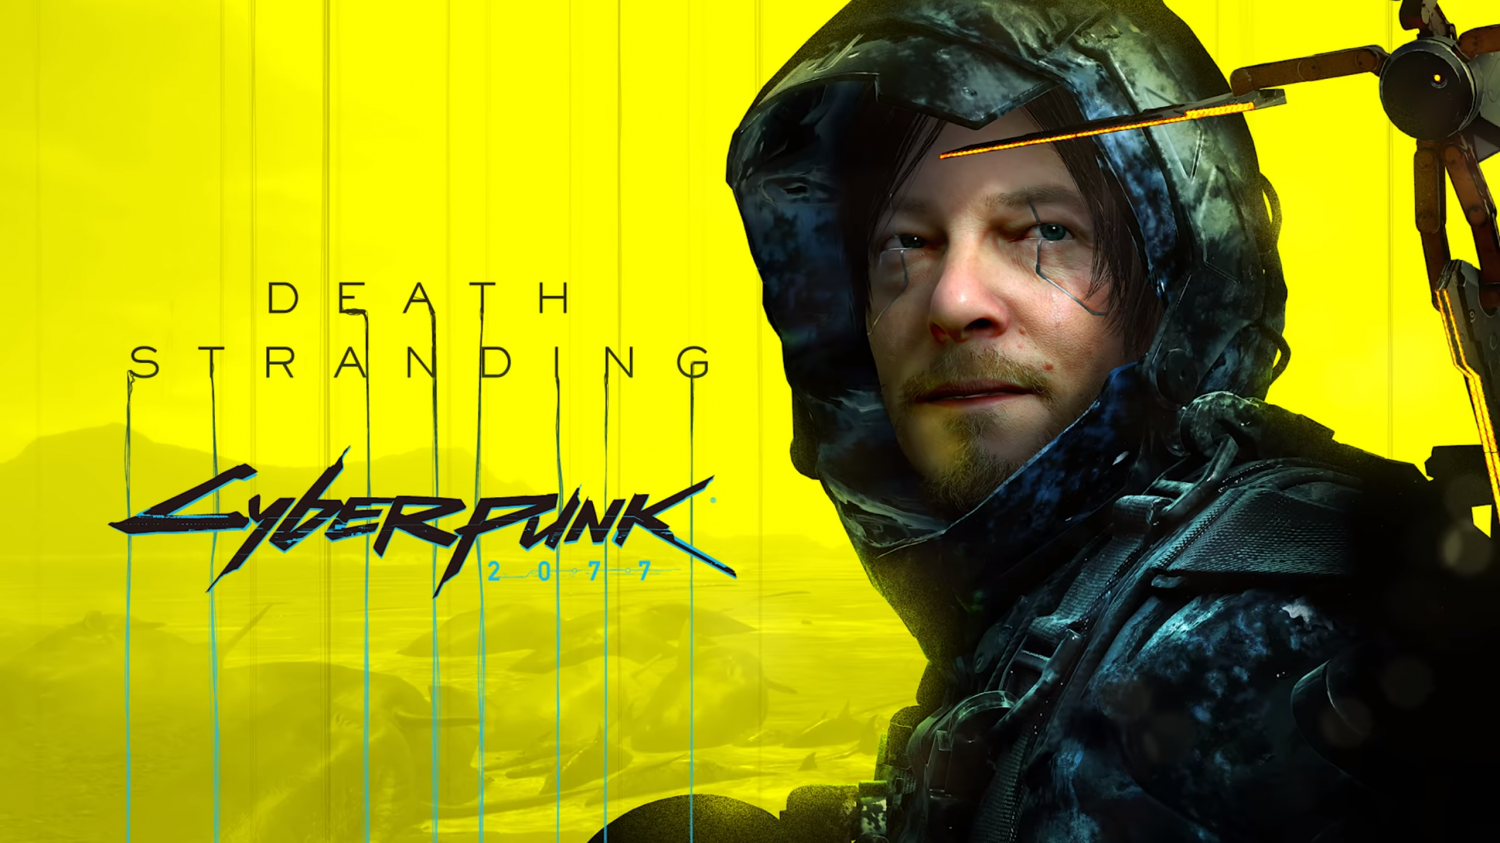 What free Cyberpunk 2077 items have been added to Death Stranding